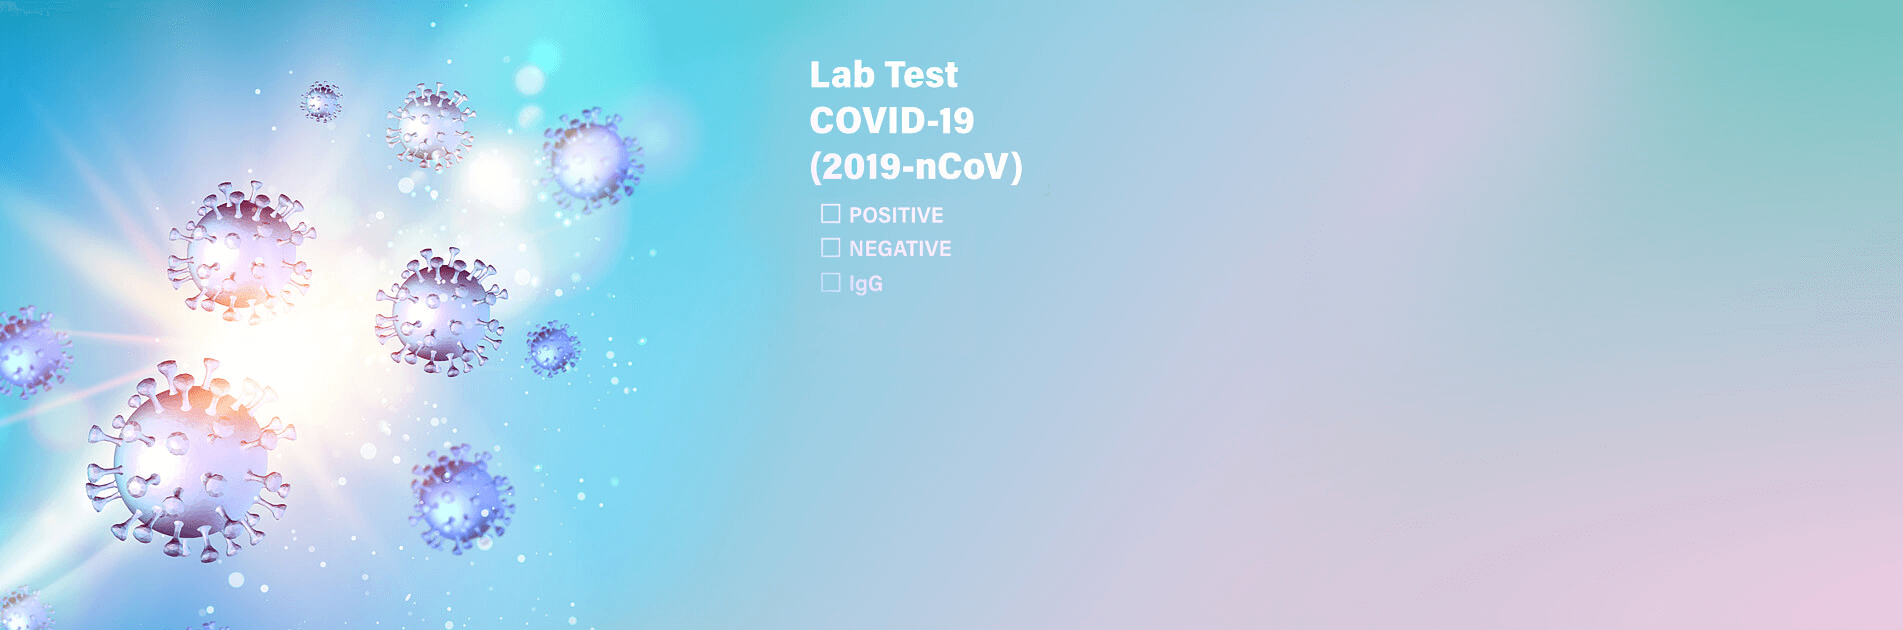 Lenco Diagnostic Laboratories Offers Serology Testing to Detect Antibodies Against COVID-19